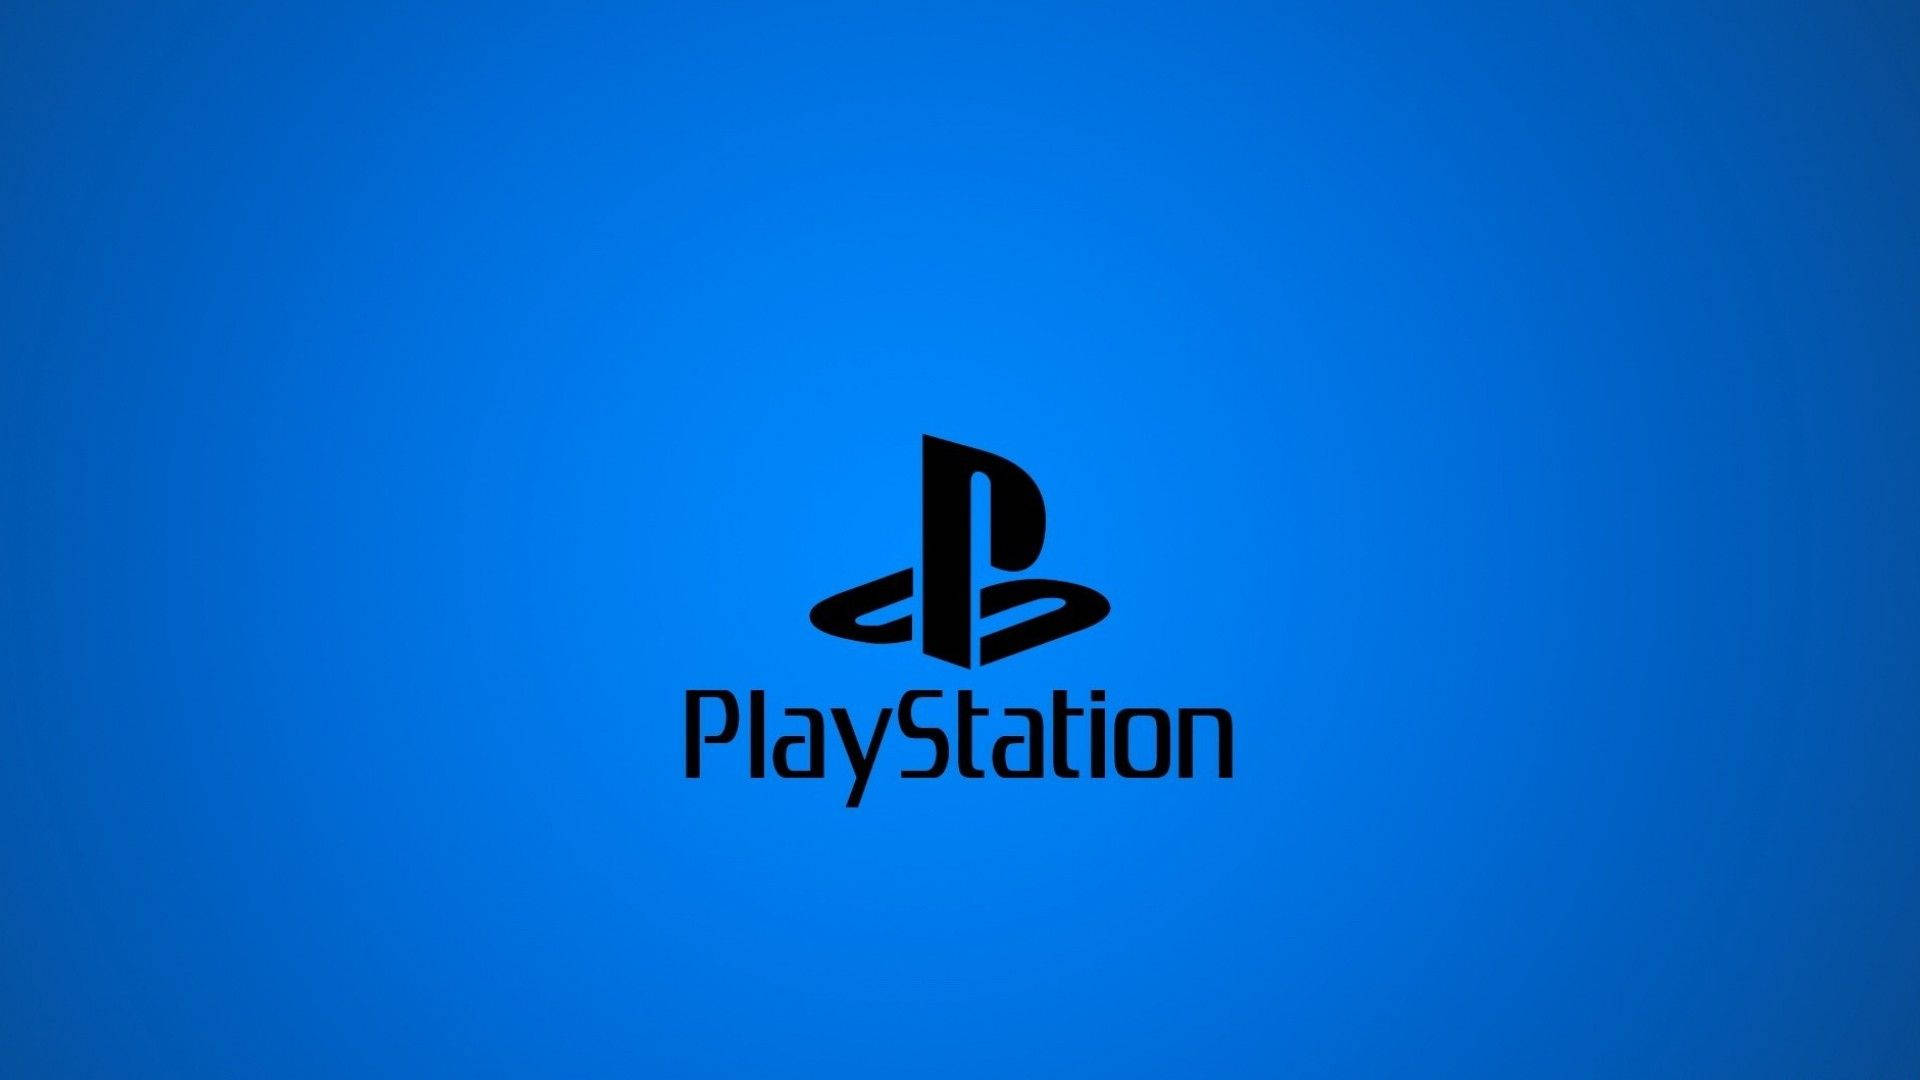 Get ready to game with the Playstation Wallpaper